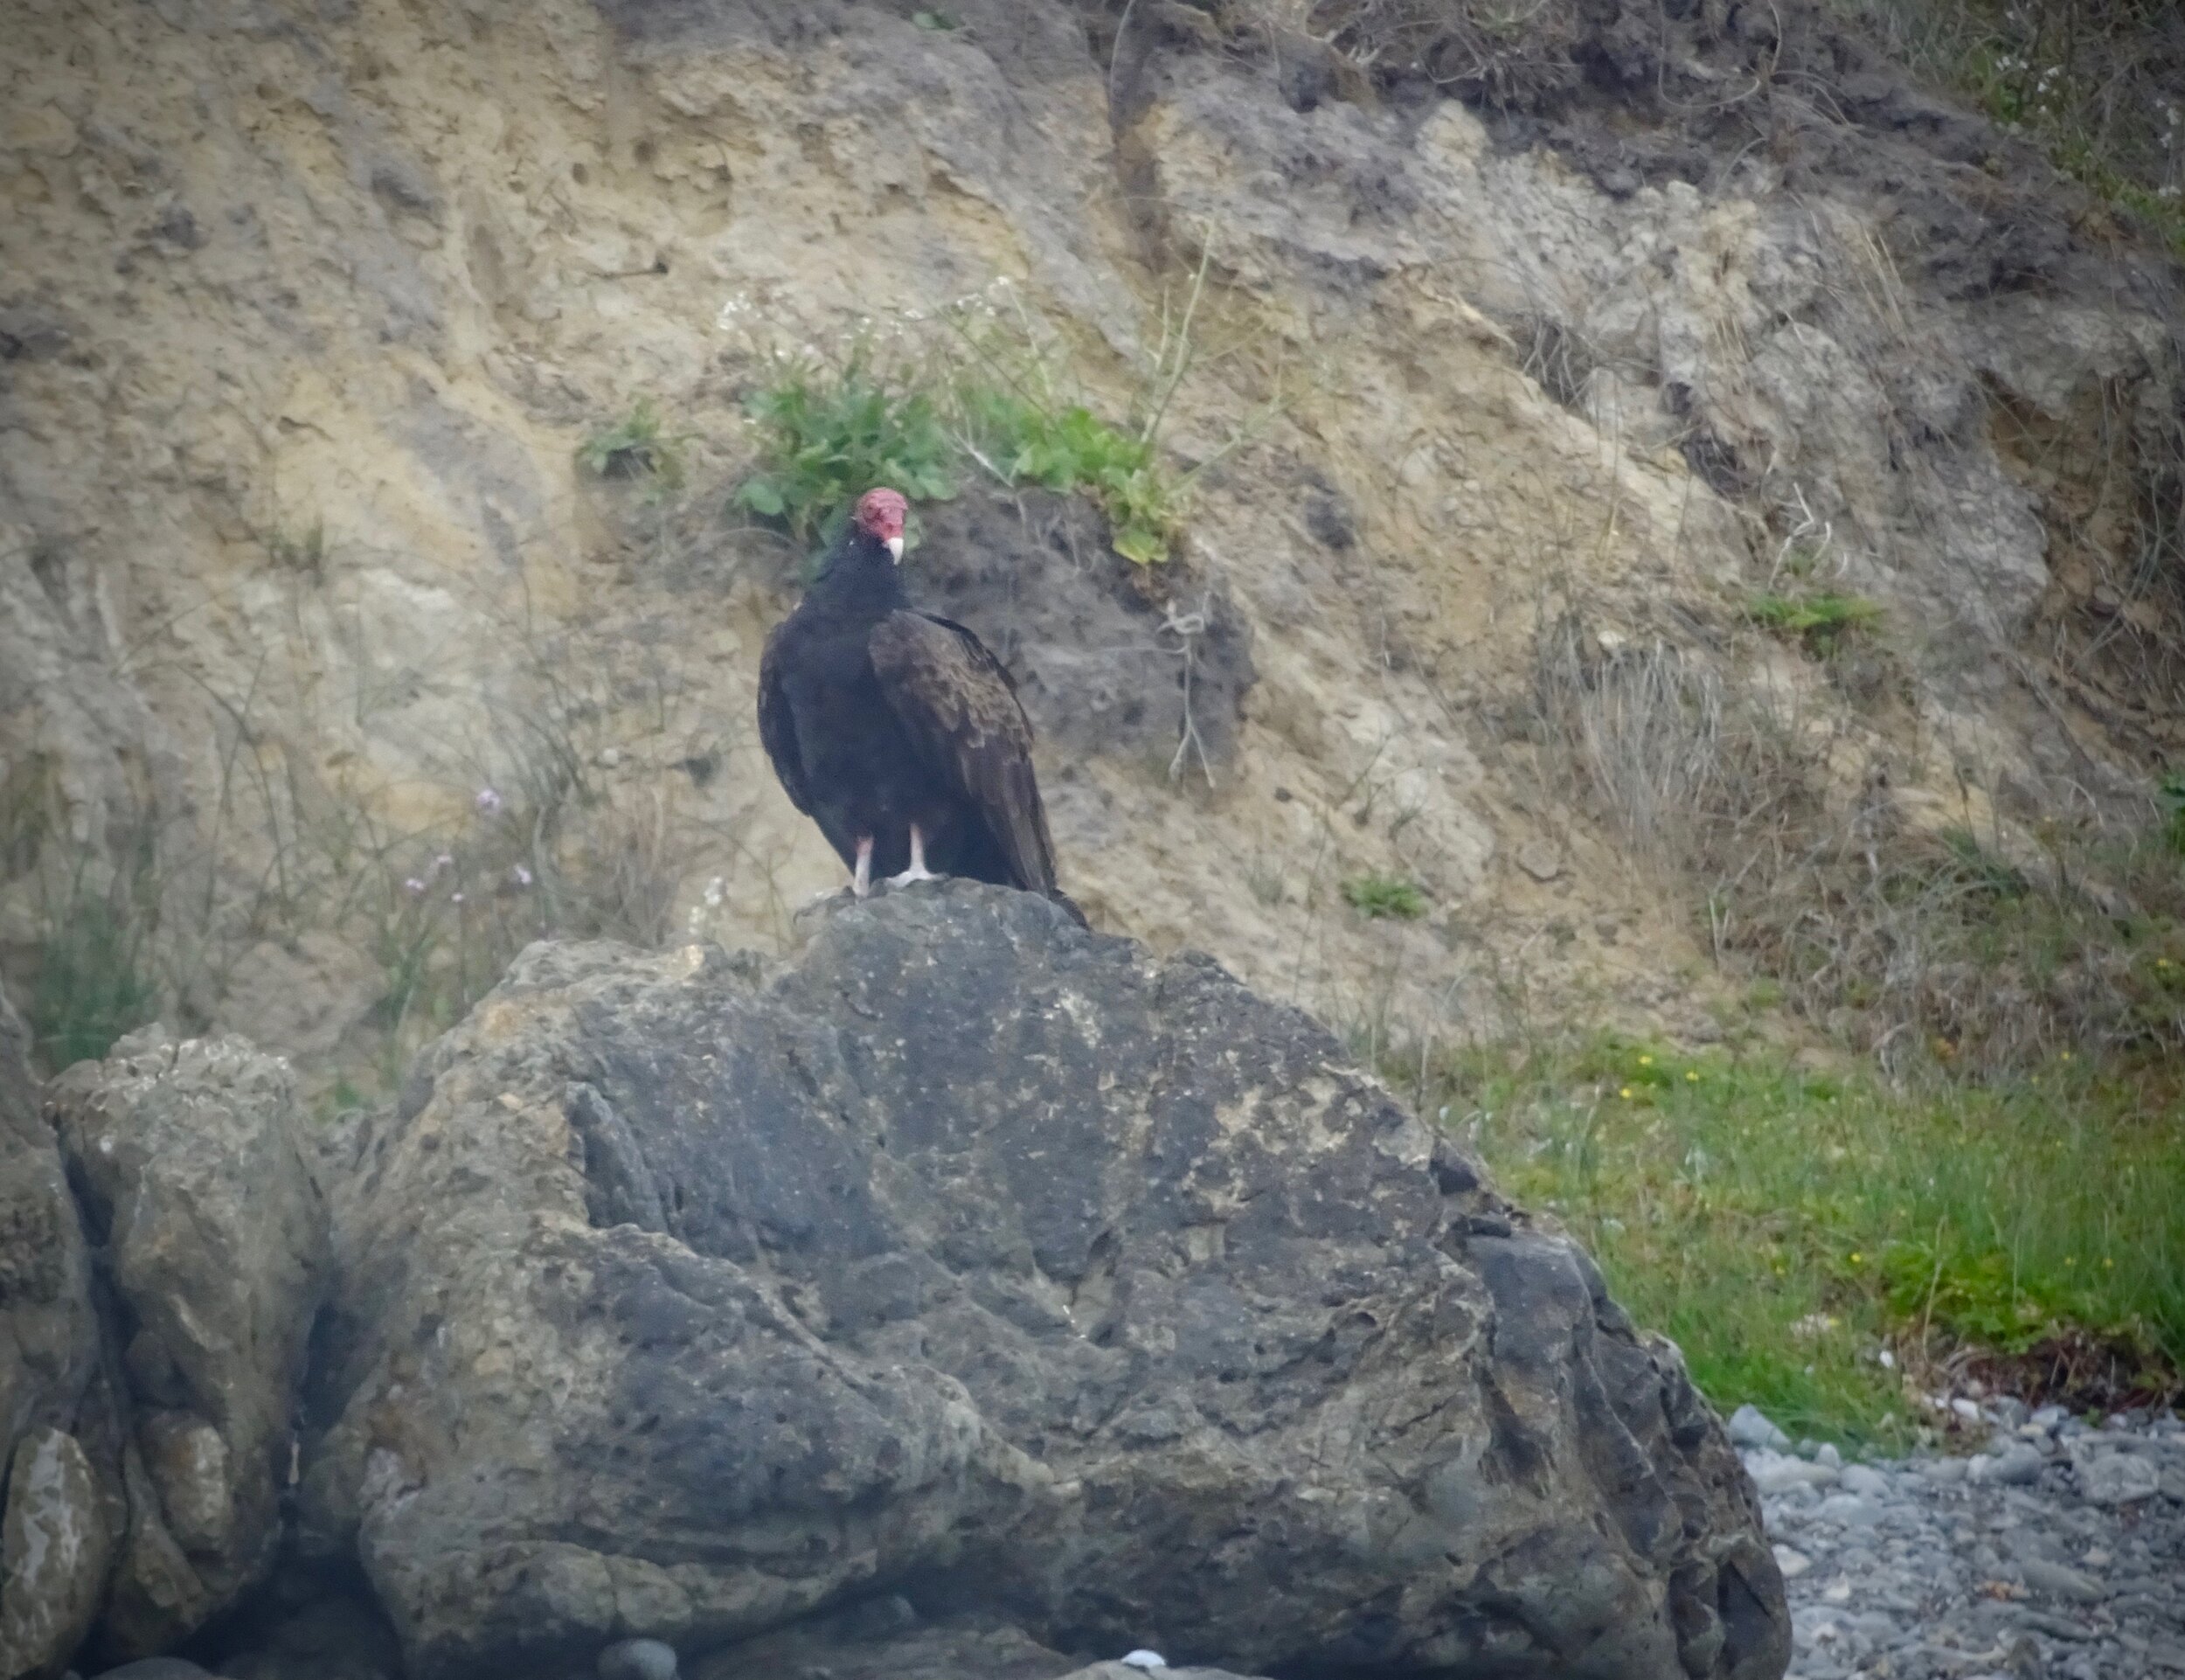 A turkey vulture just hangs out near Bunny and I on one of the beaches (another one is just up that hill behind him.)  We did not stay long.  Those are truly big and impressive, but scary looking birds!